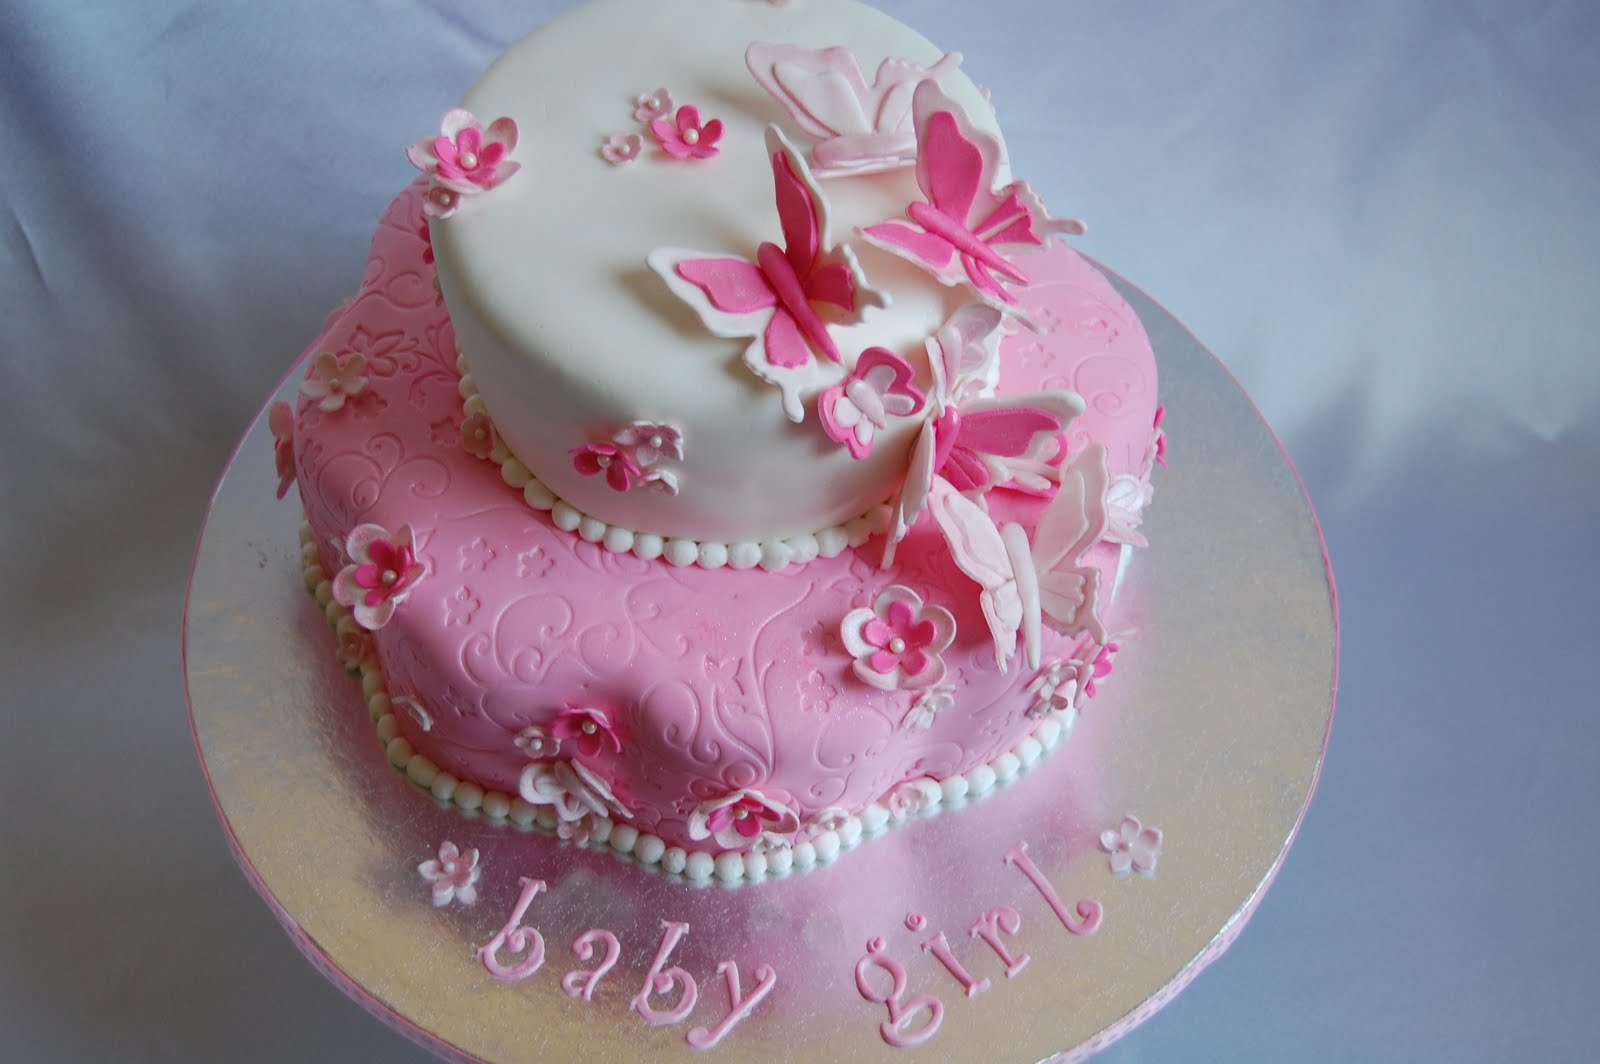 This adorable cake was an order for a special friend expecting a ...